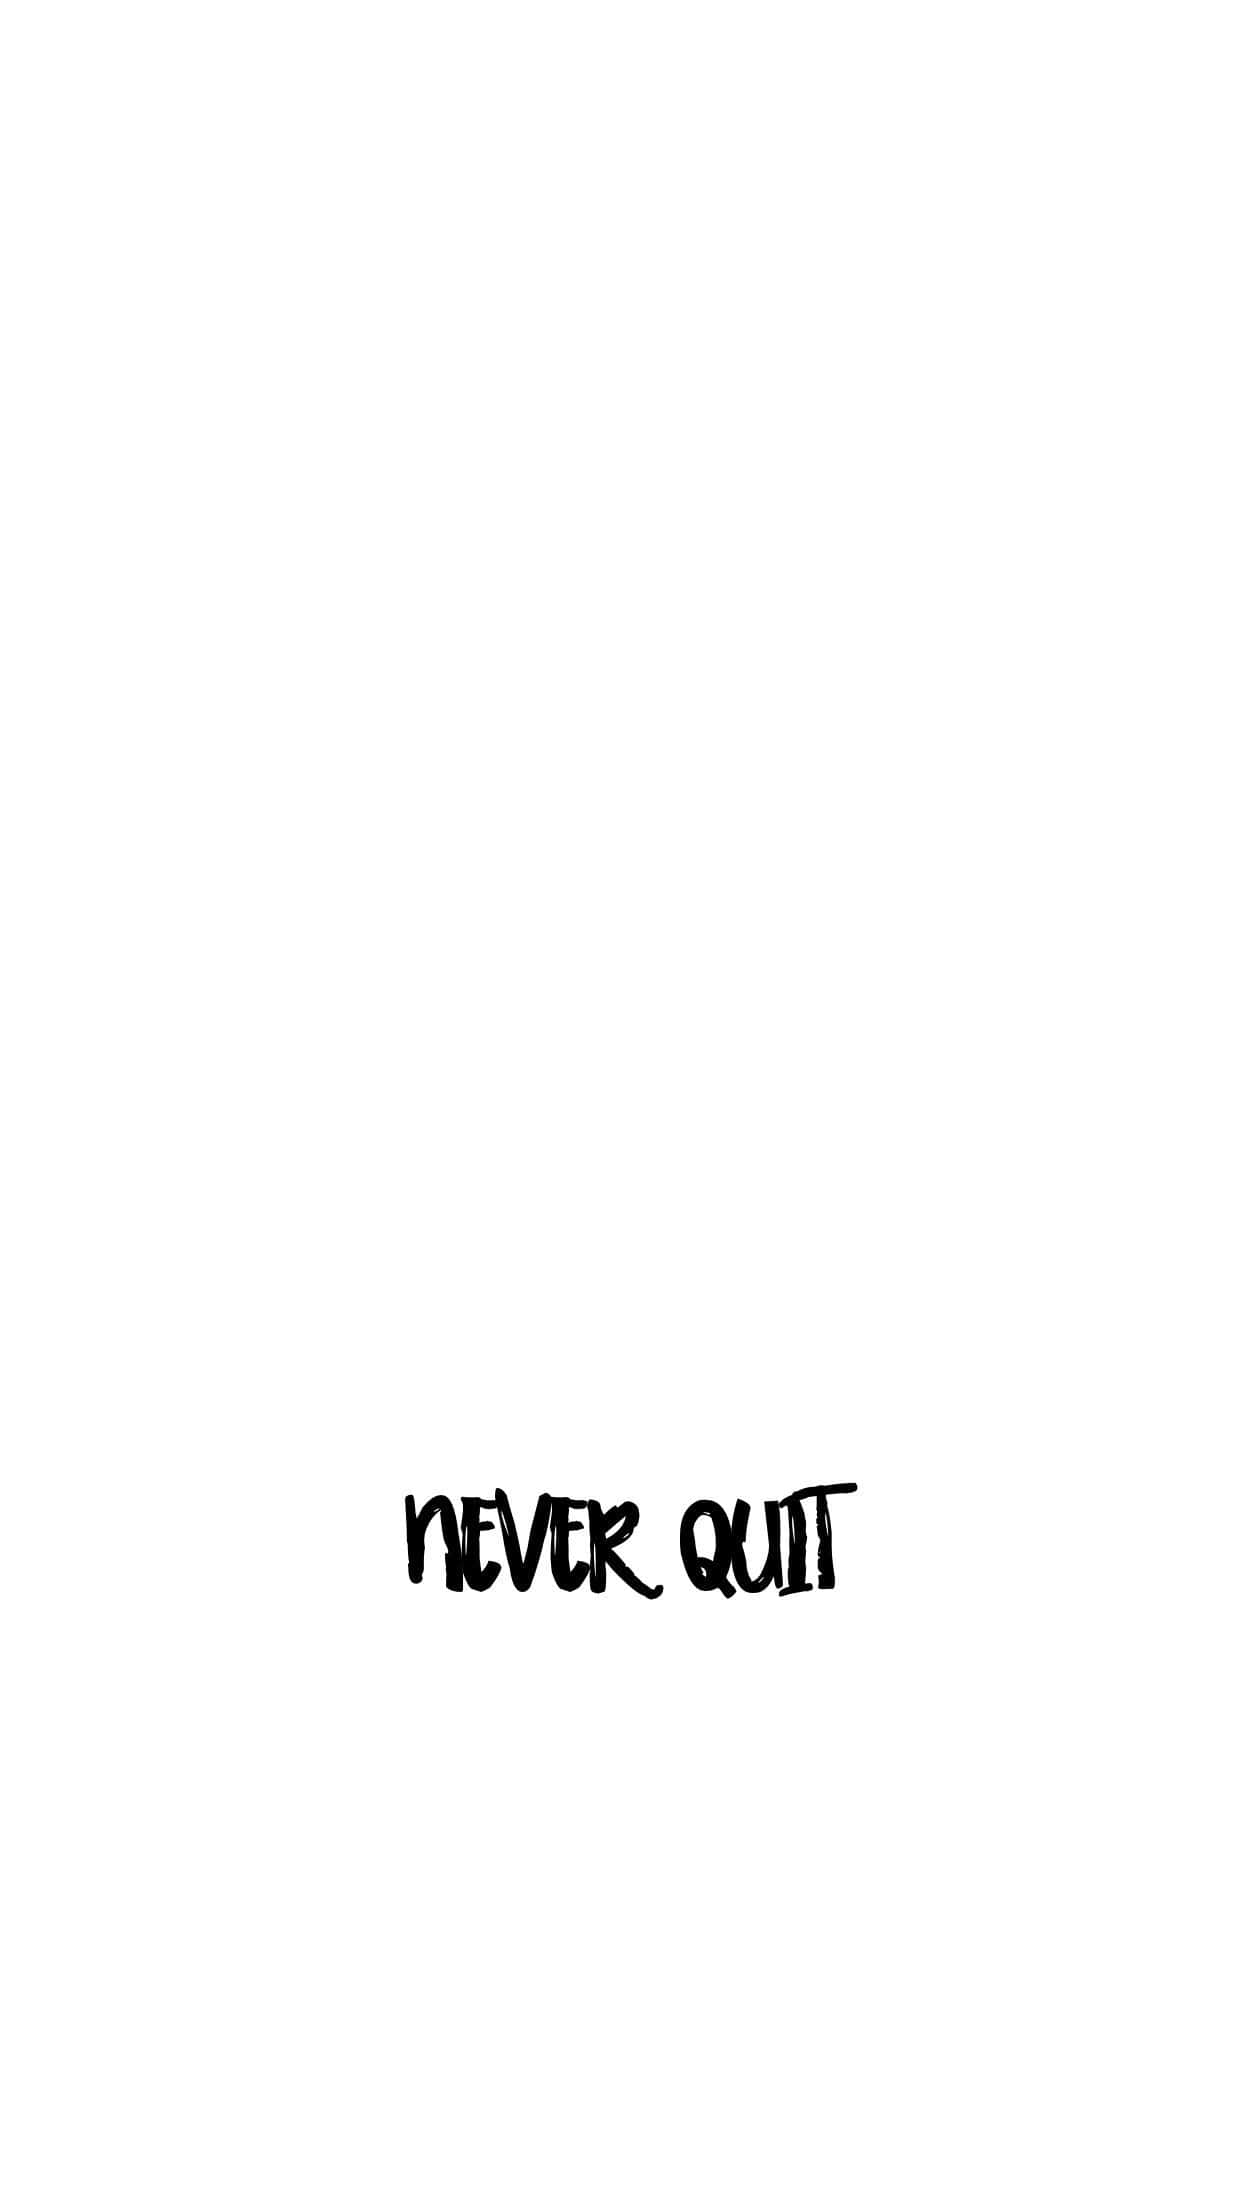 A Black And White Image Of A Black And White Image Of The Word Never Quit